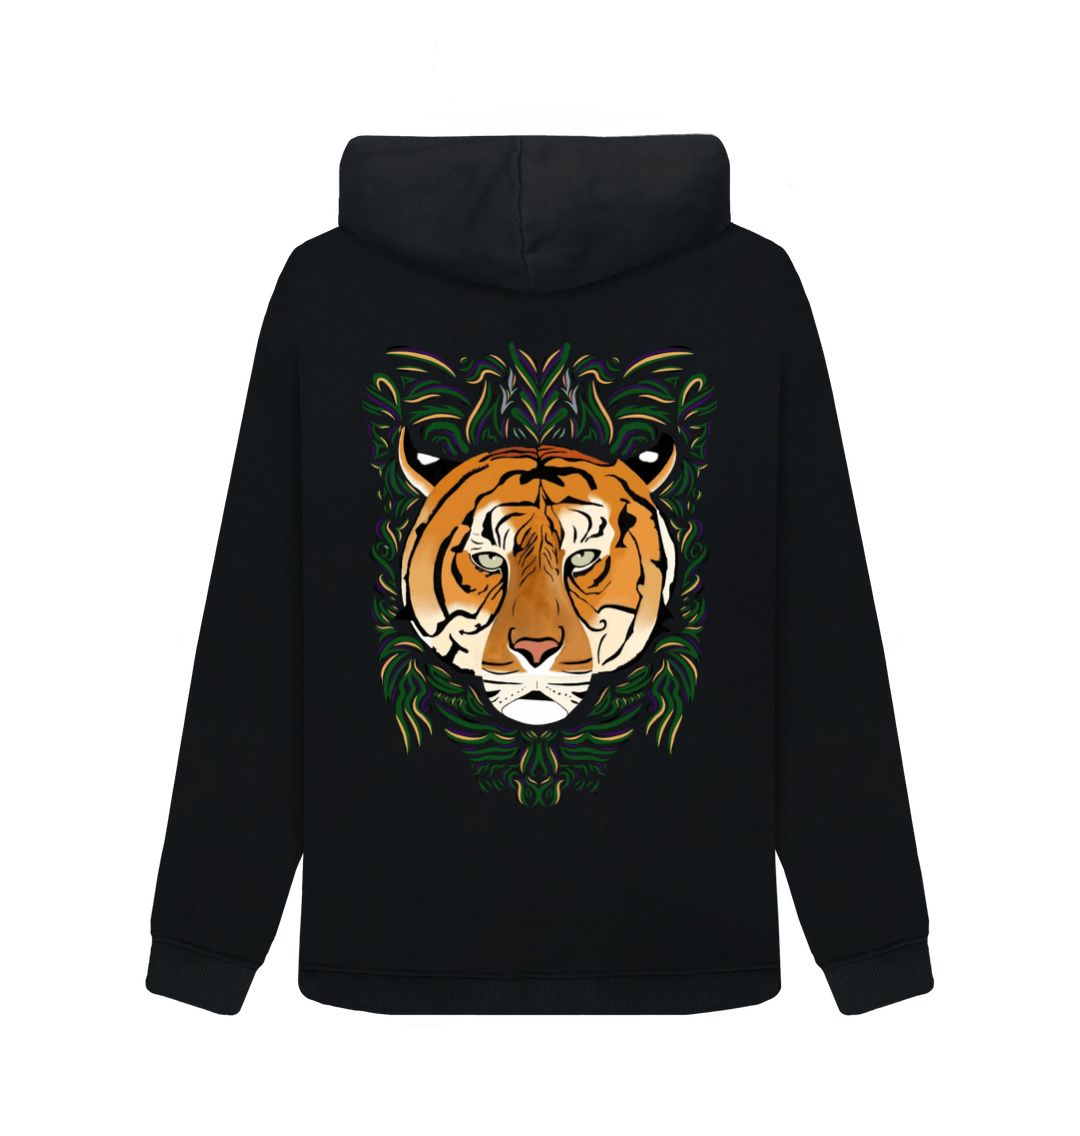 Sumatra's Most Wanted | Women's Hoodie